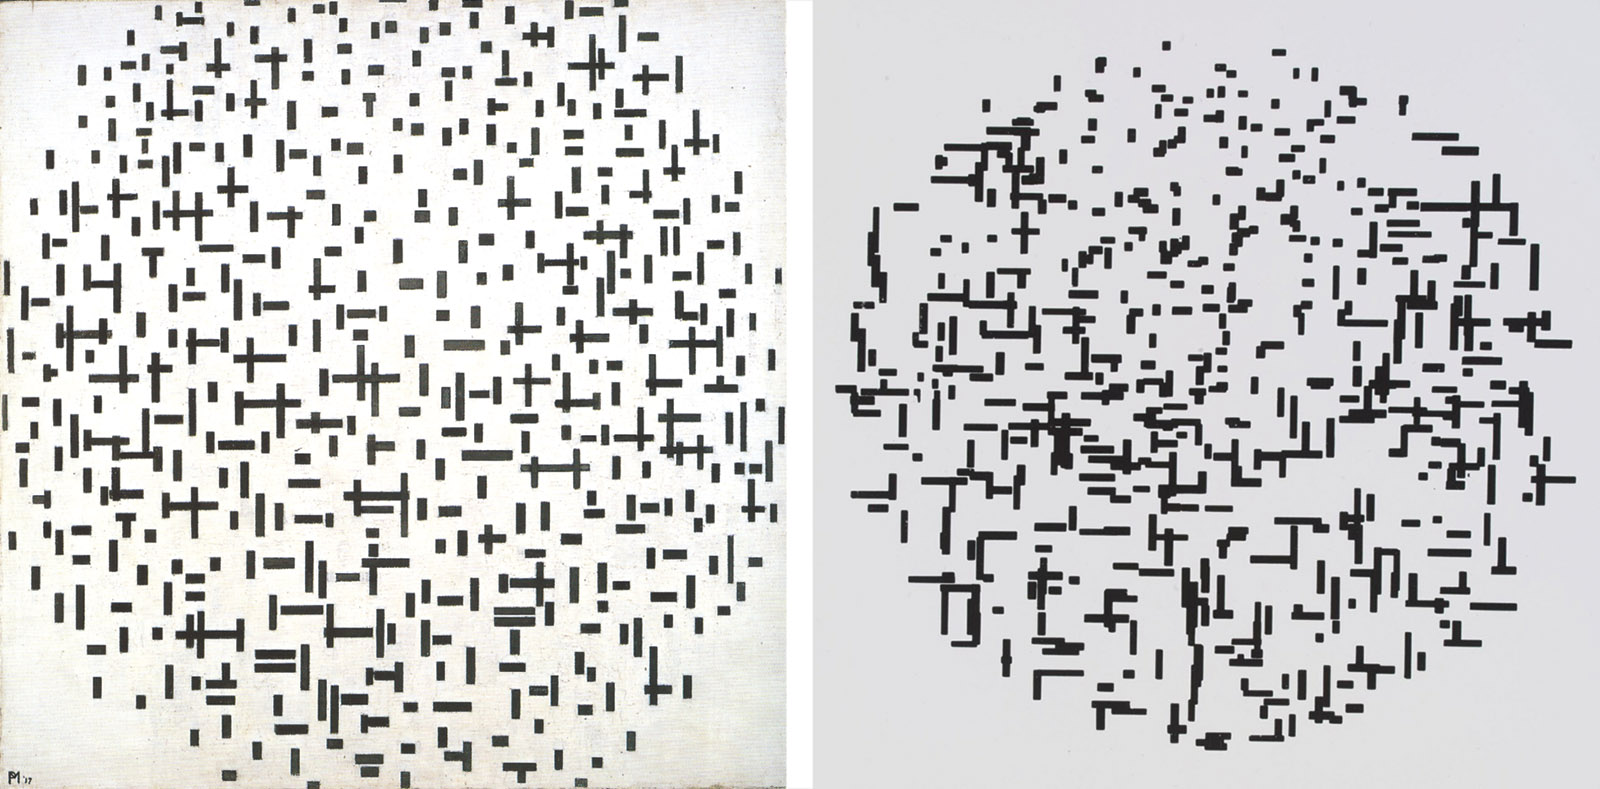 Left: Piet Mondrian: Composition with Lines (Composition in Black and White), 1916–1917; right: A. Michael Noll: Computer Composition with Lines